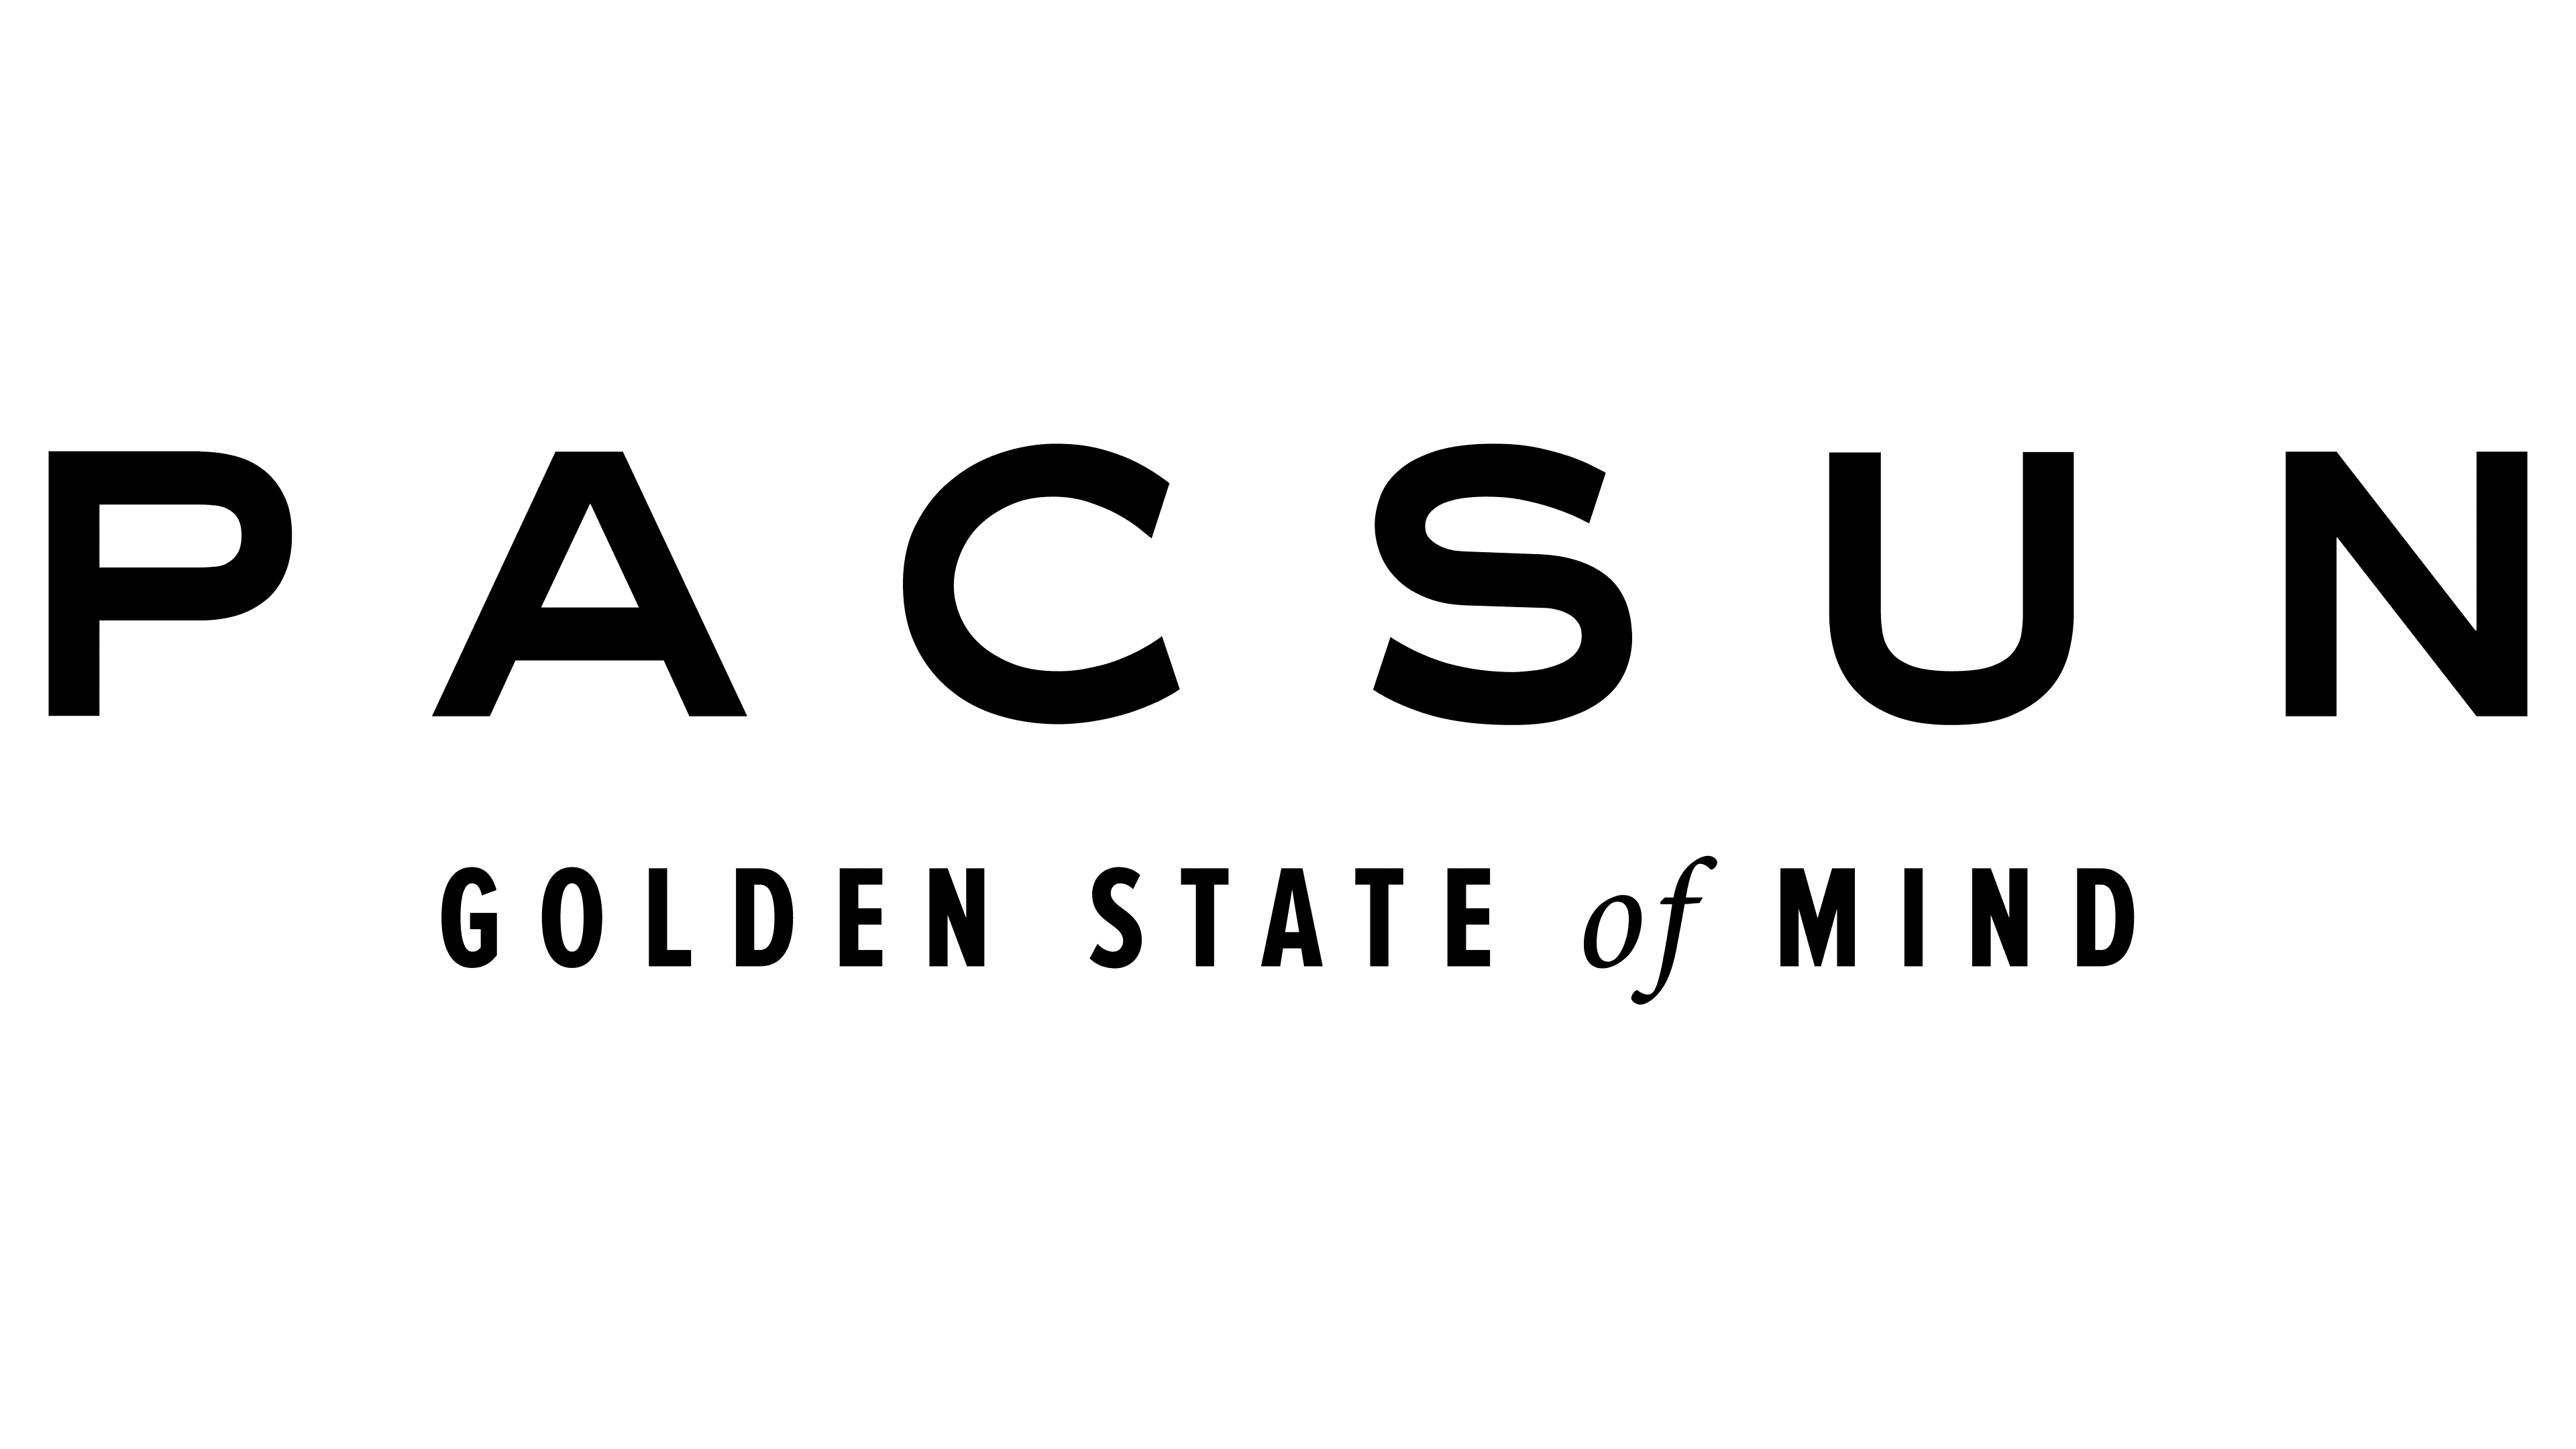 Pacsun Logo, symbol, meaning, history, PNG, brand